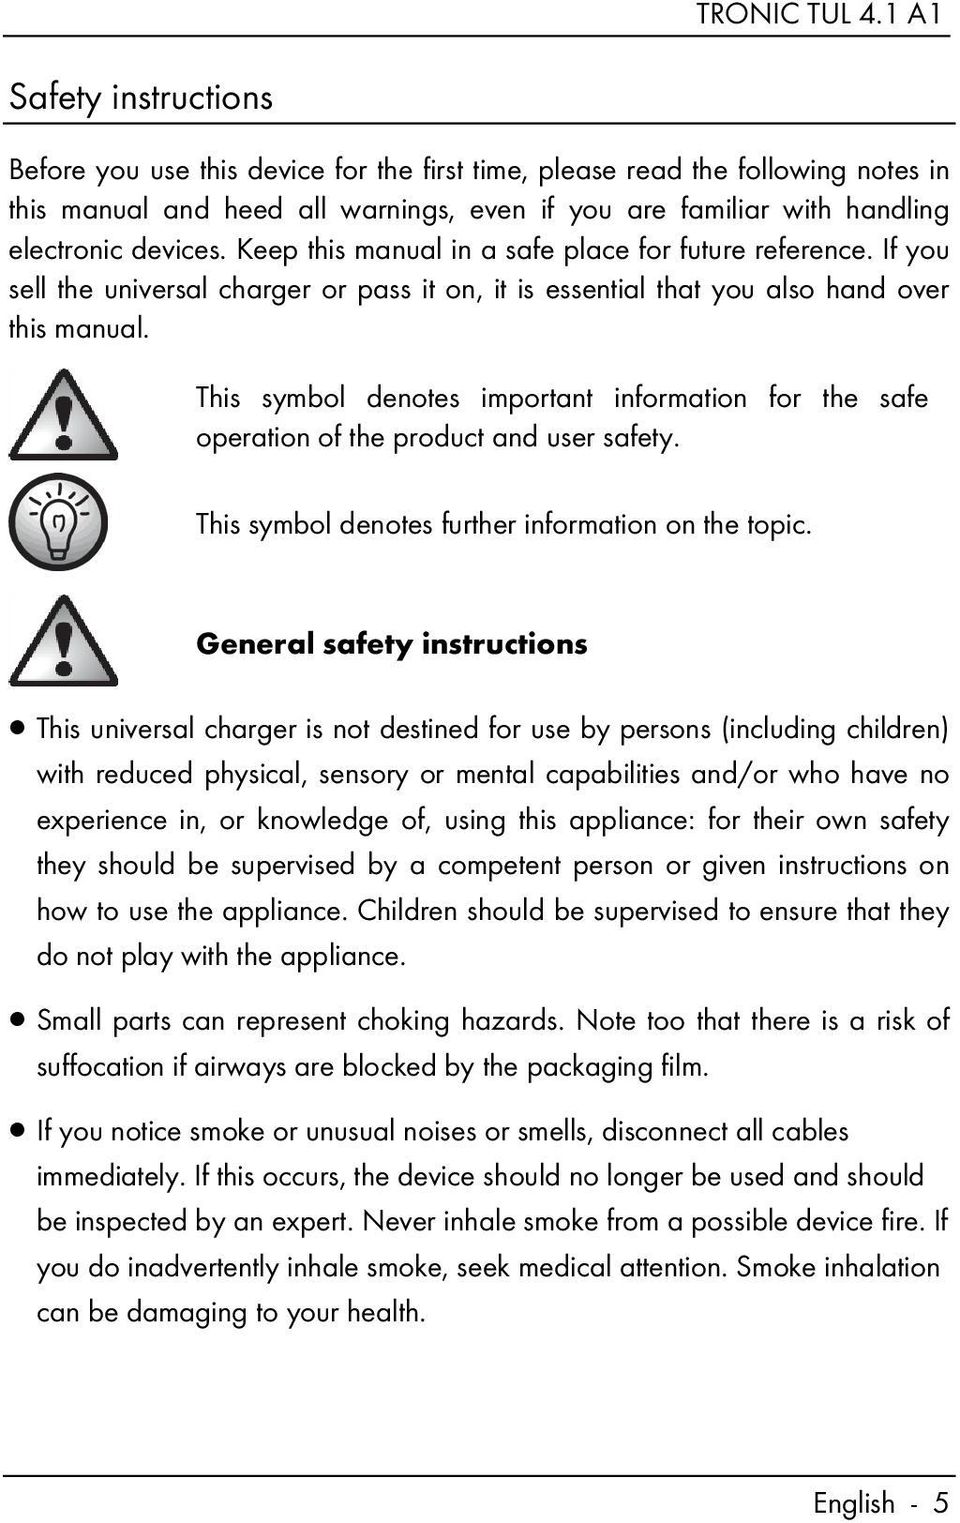 This symbol denotes important information for the safe operation of the product and user safety. This symbol denotes further information on the topic.